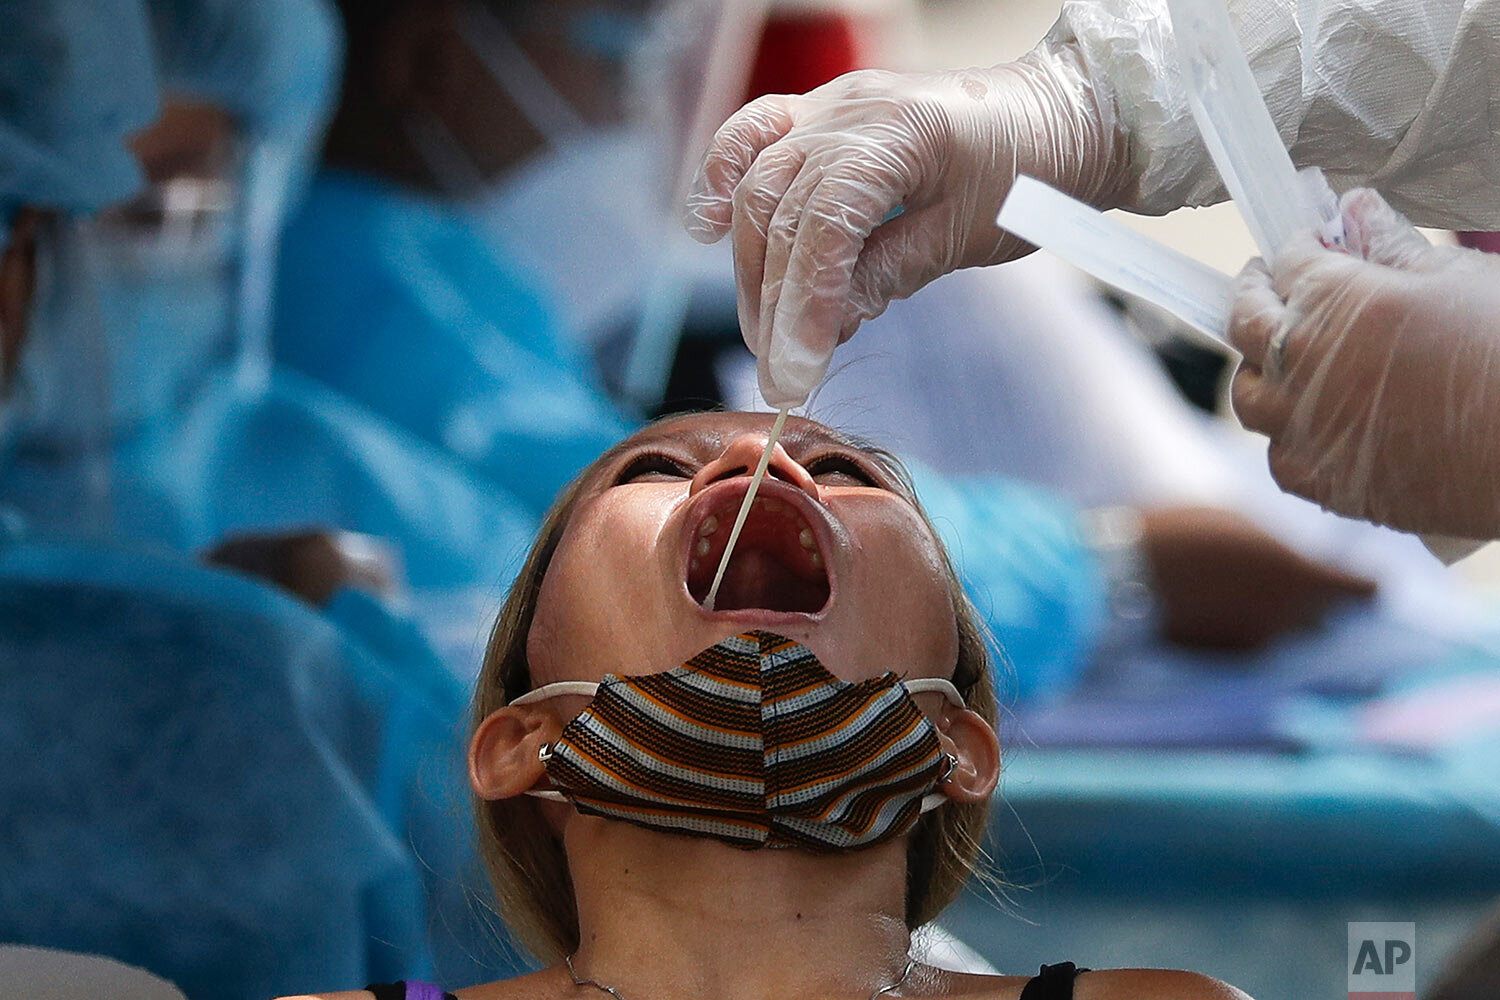  A health worker conducts a COVID-19 swab test on a resident as they monitor cases at a village in Quezon City, Philippines on Monday, May 31, 2021.  (AP Photo/Aaron Favila) 